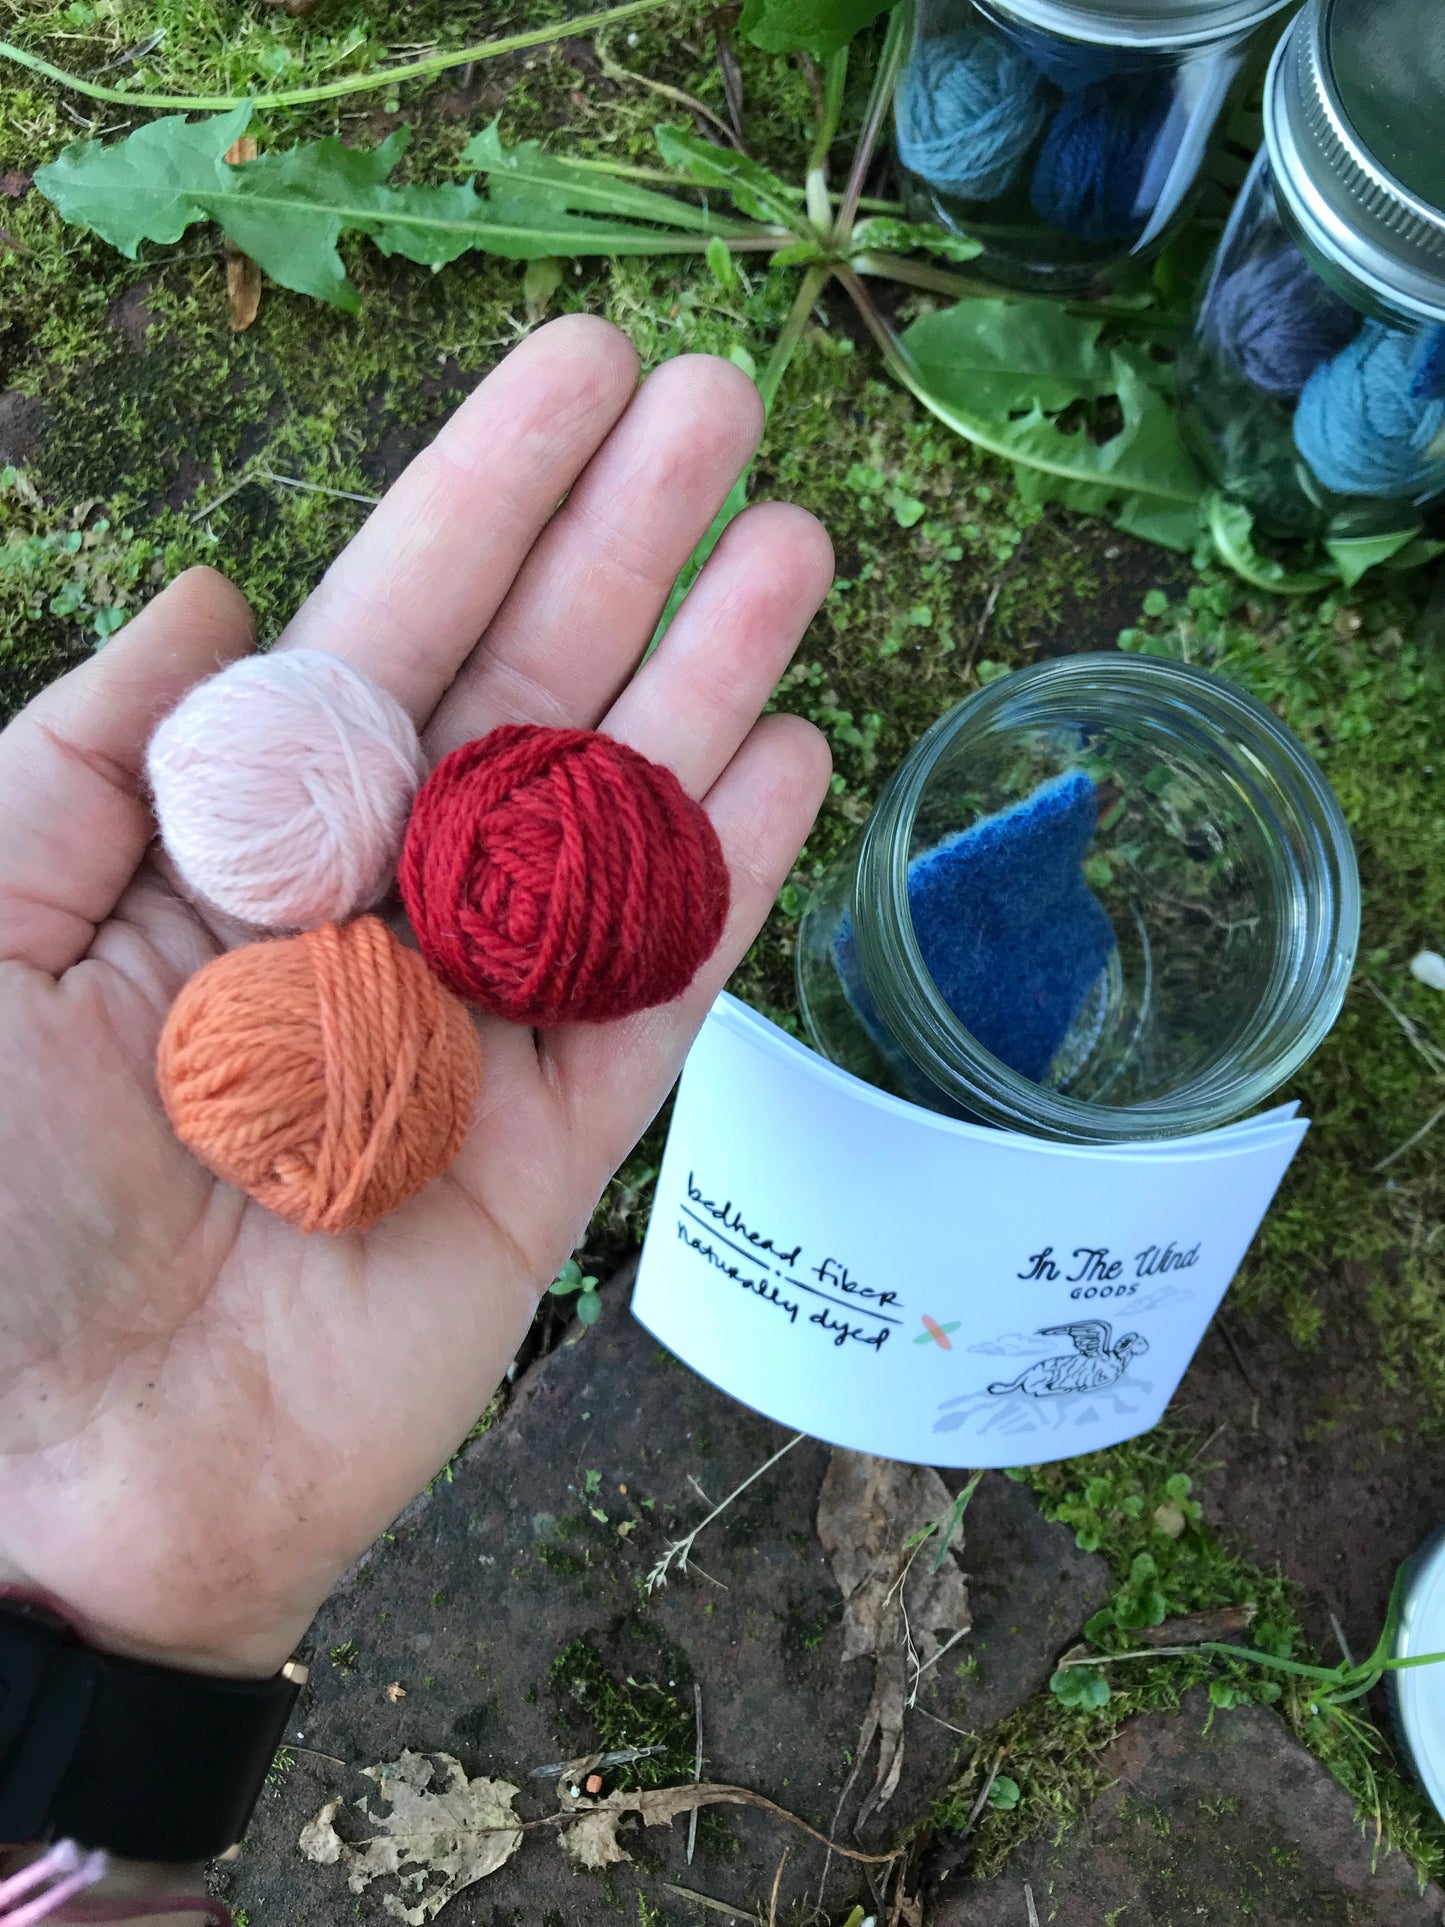 ON SALE! Mend Its Cottage Set of 3 Darning Yarn